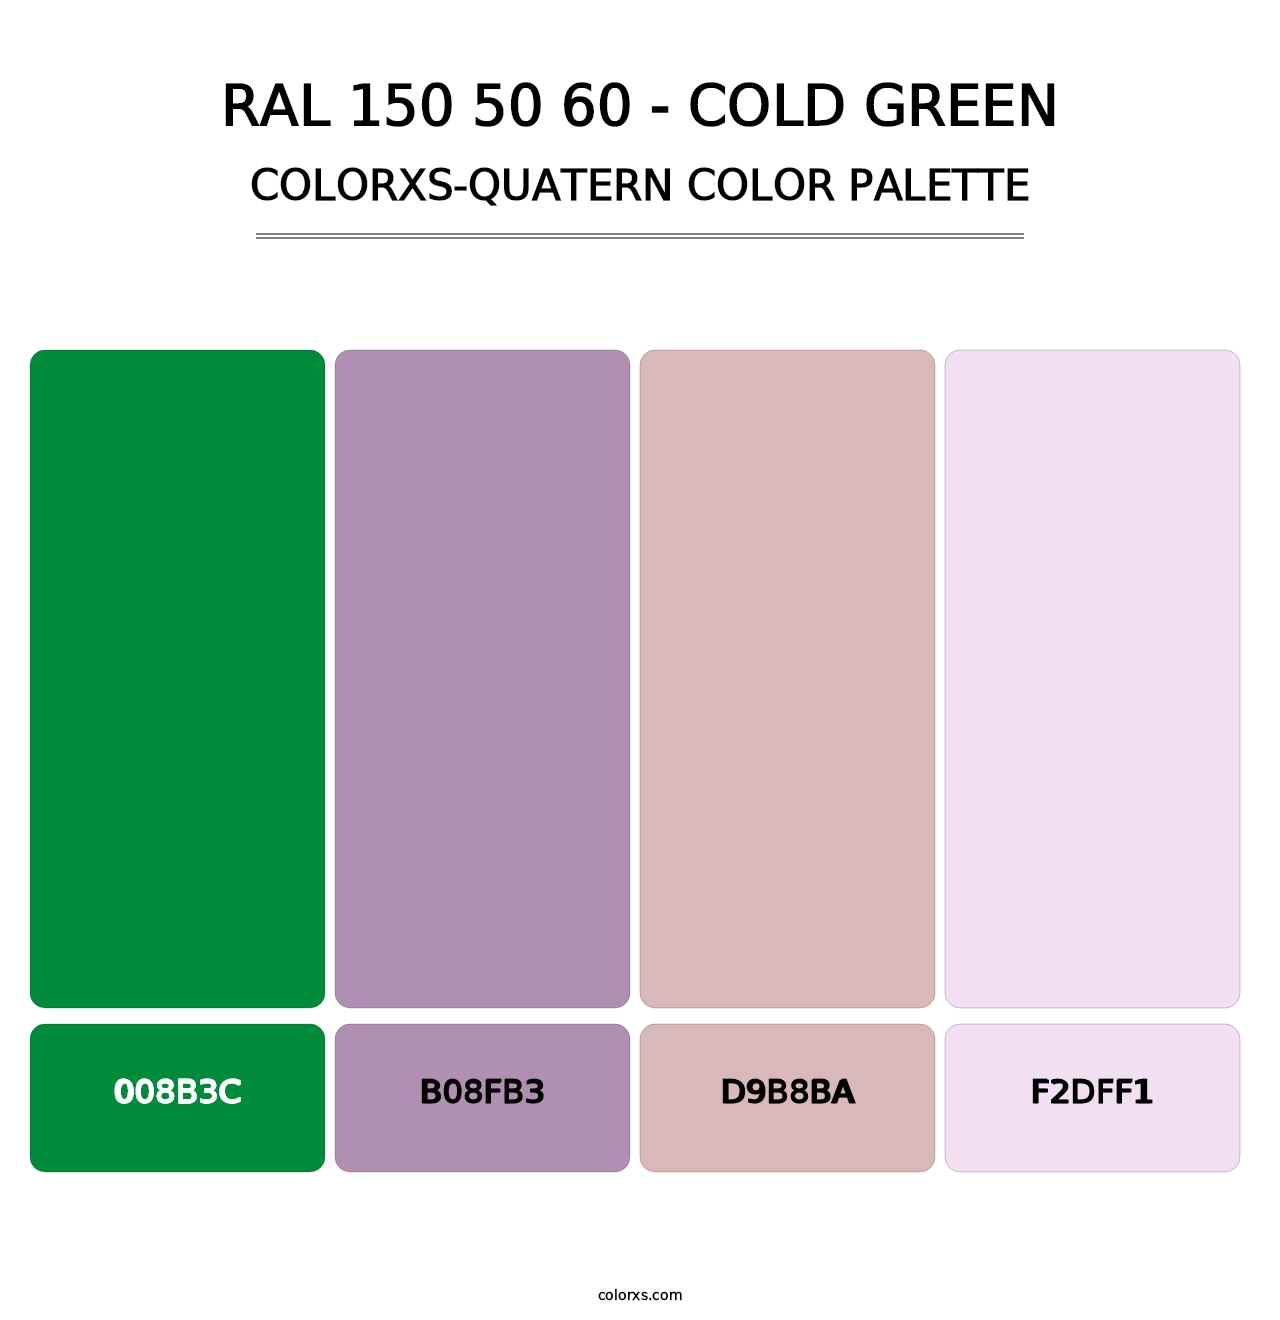 RAL 150 50 60 - Cold Green - Colorxs Quatern Palette